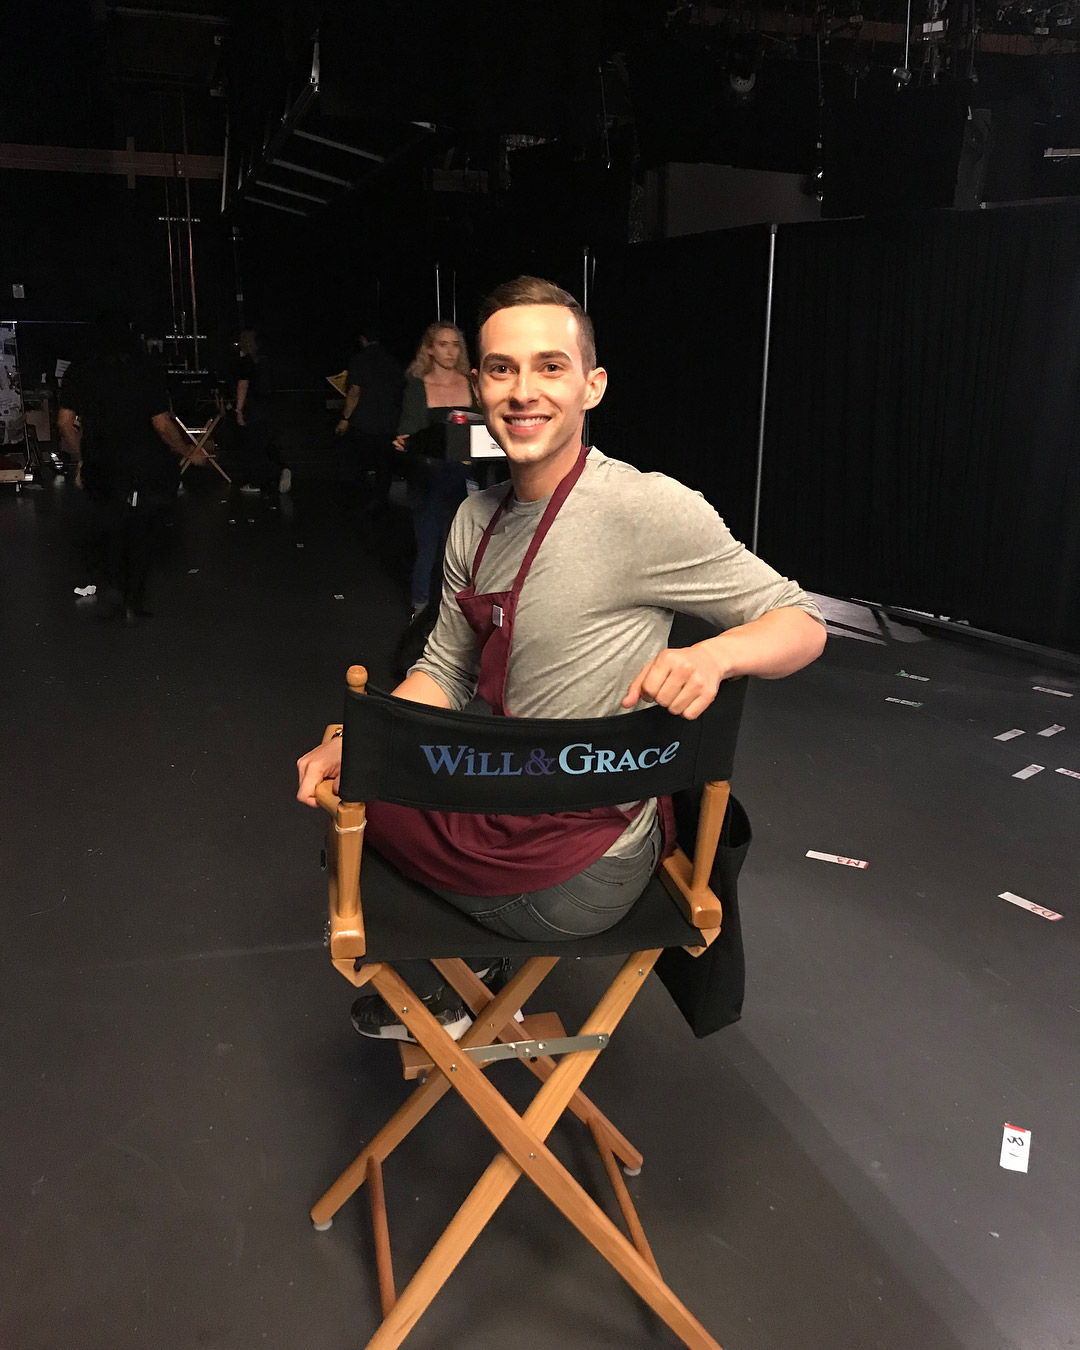 Adam Rippon ‘Almost Had a Full Diarrhea Attack’ While Filming Will & Grace